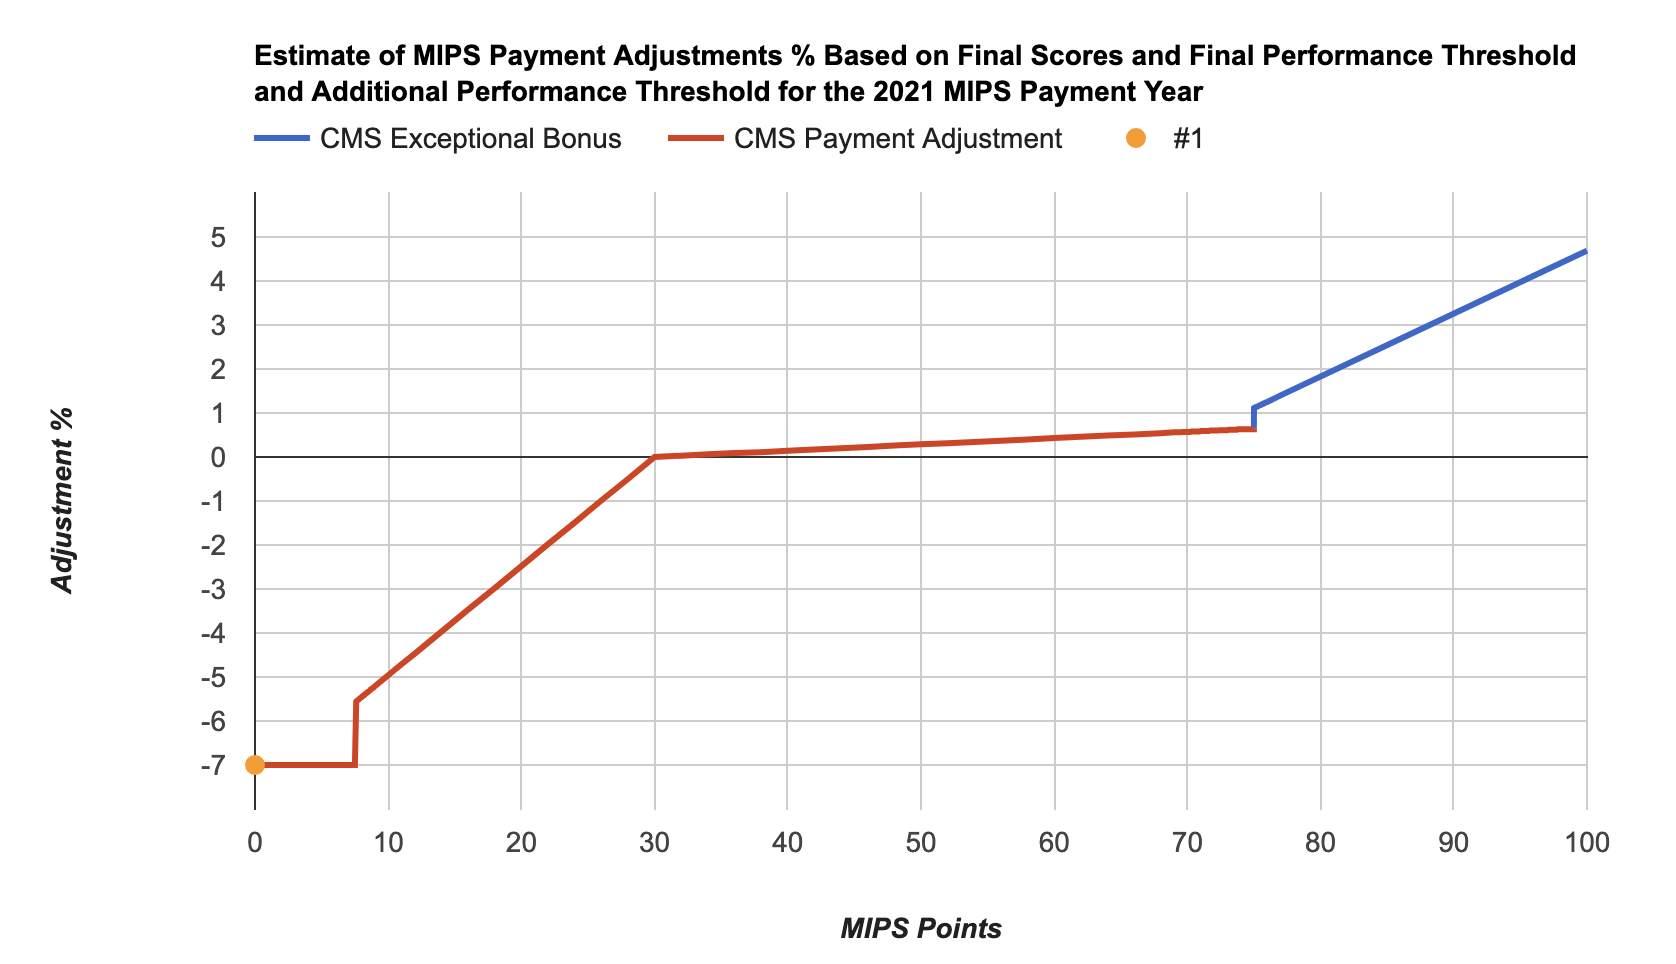 2021 MIPS Points adjustments